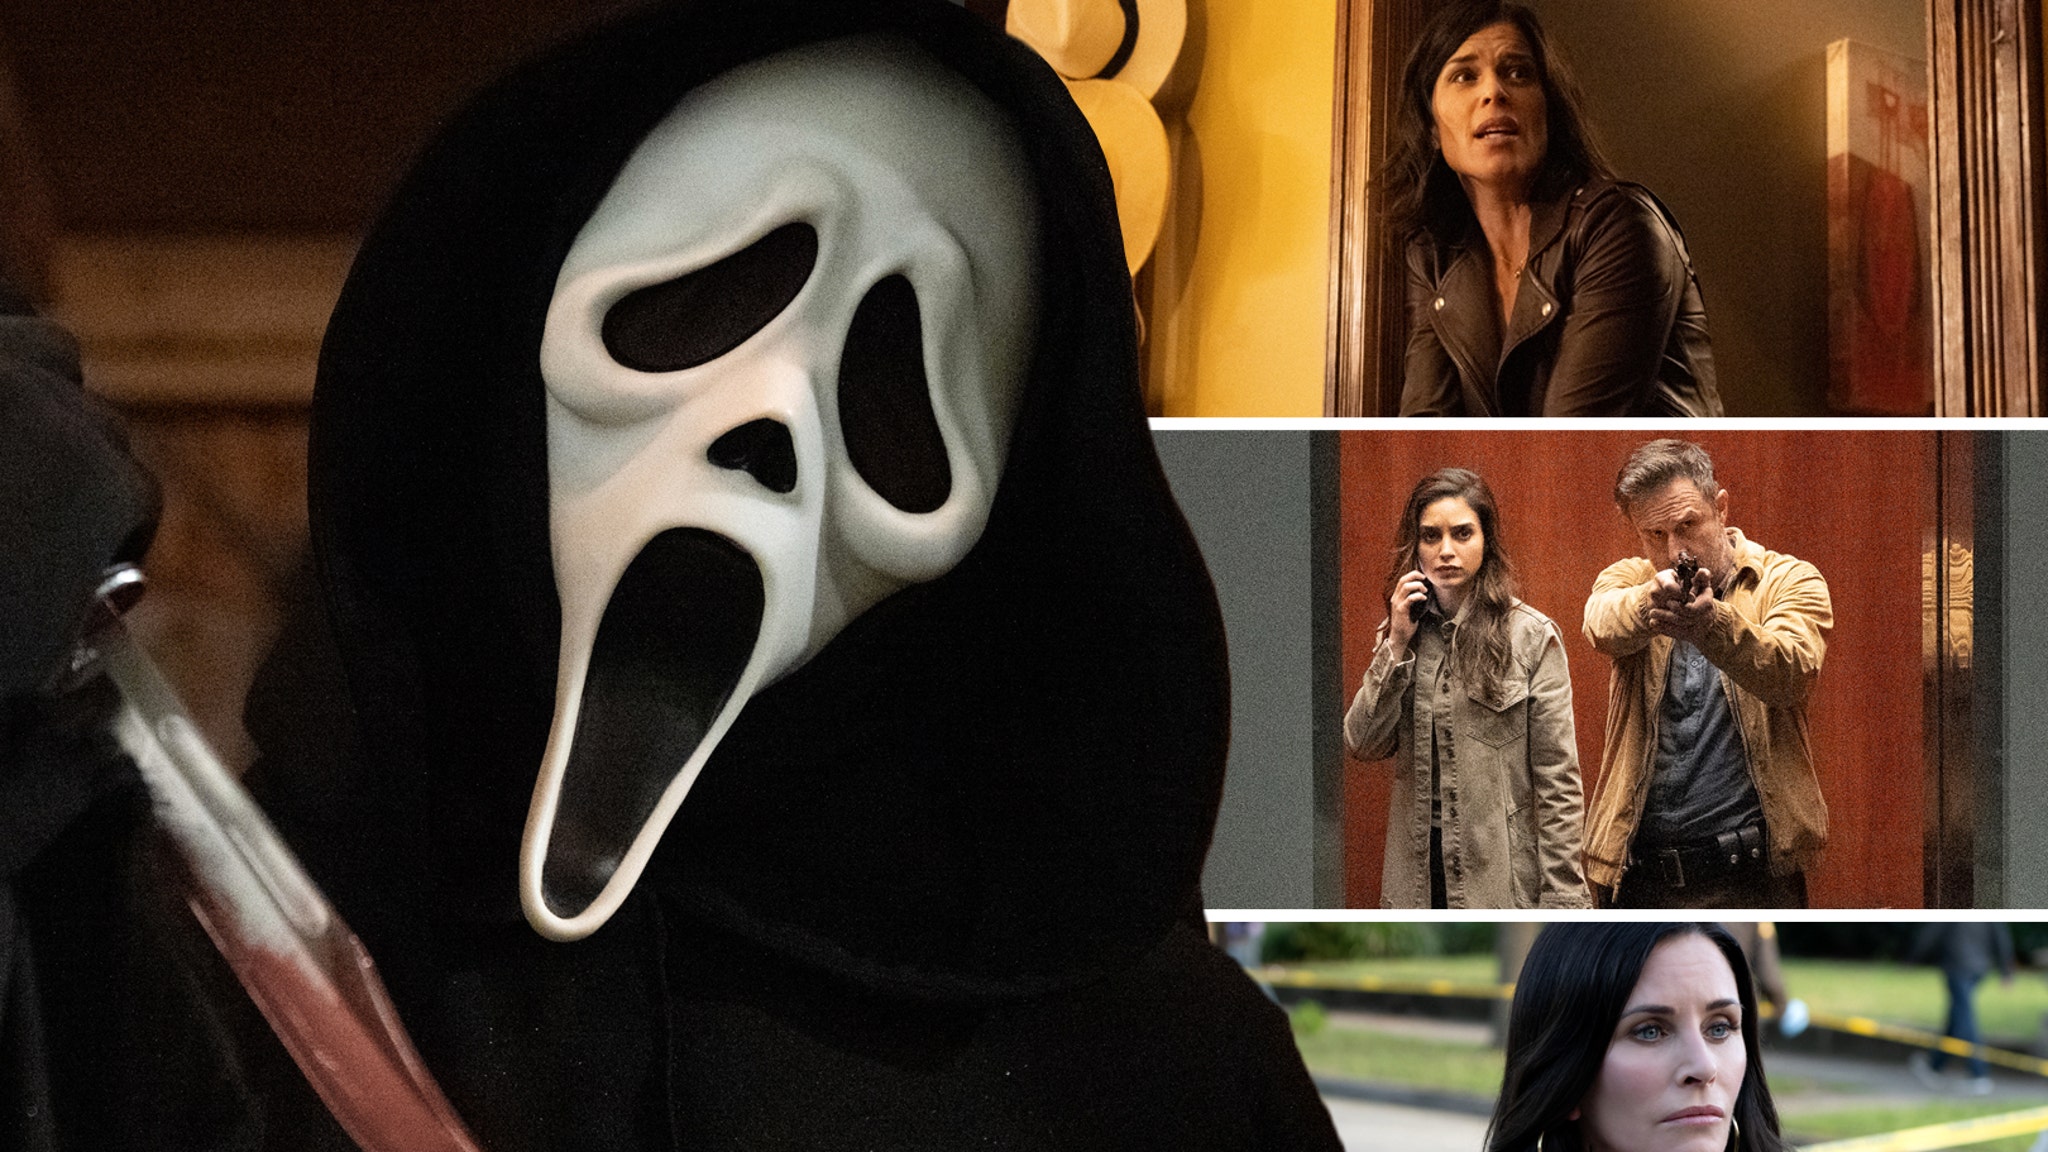 Scream VI Trailer is Loaded With Horror Easter Eggs